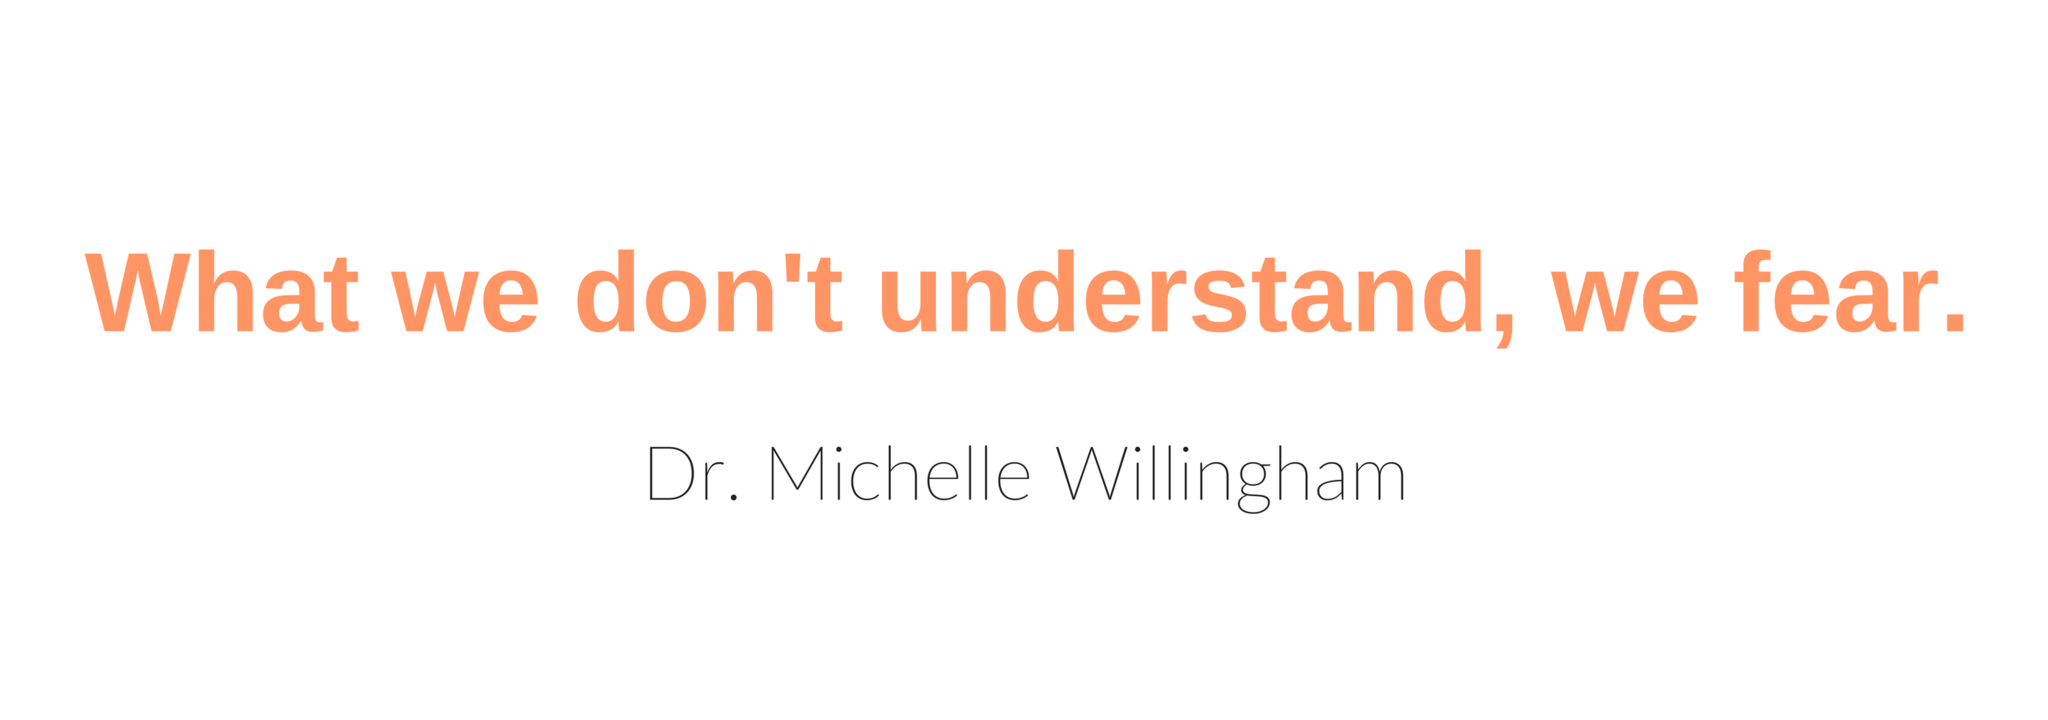 What we don't understand, we fear. Dr. Michelle Willingham